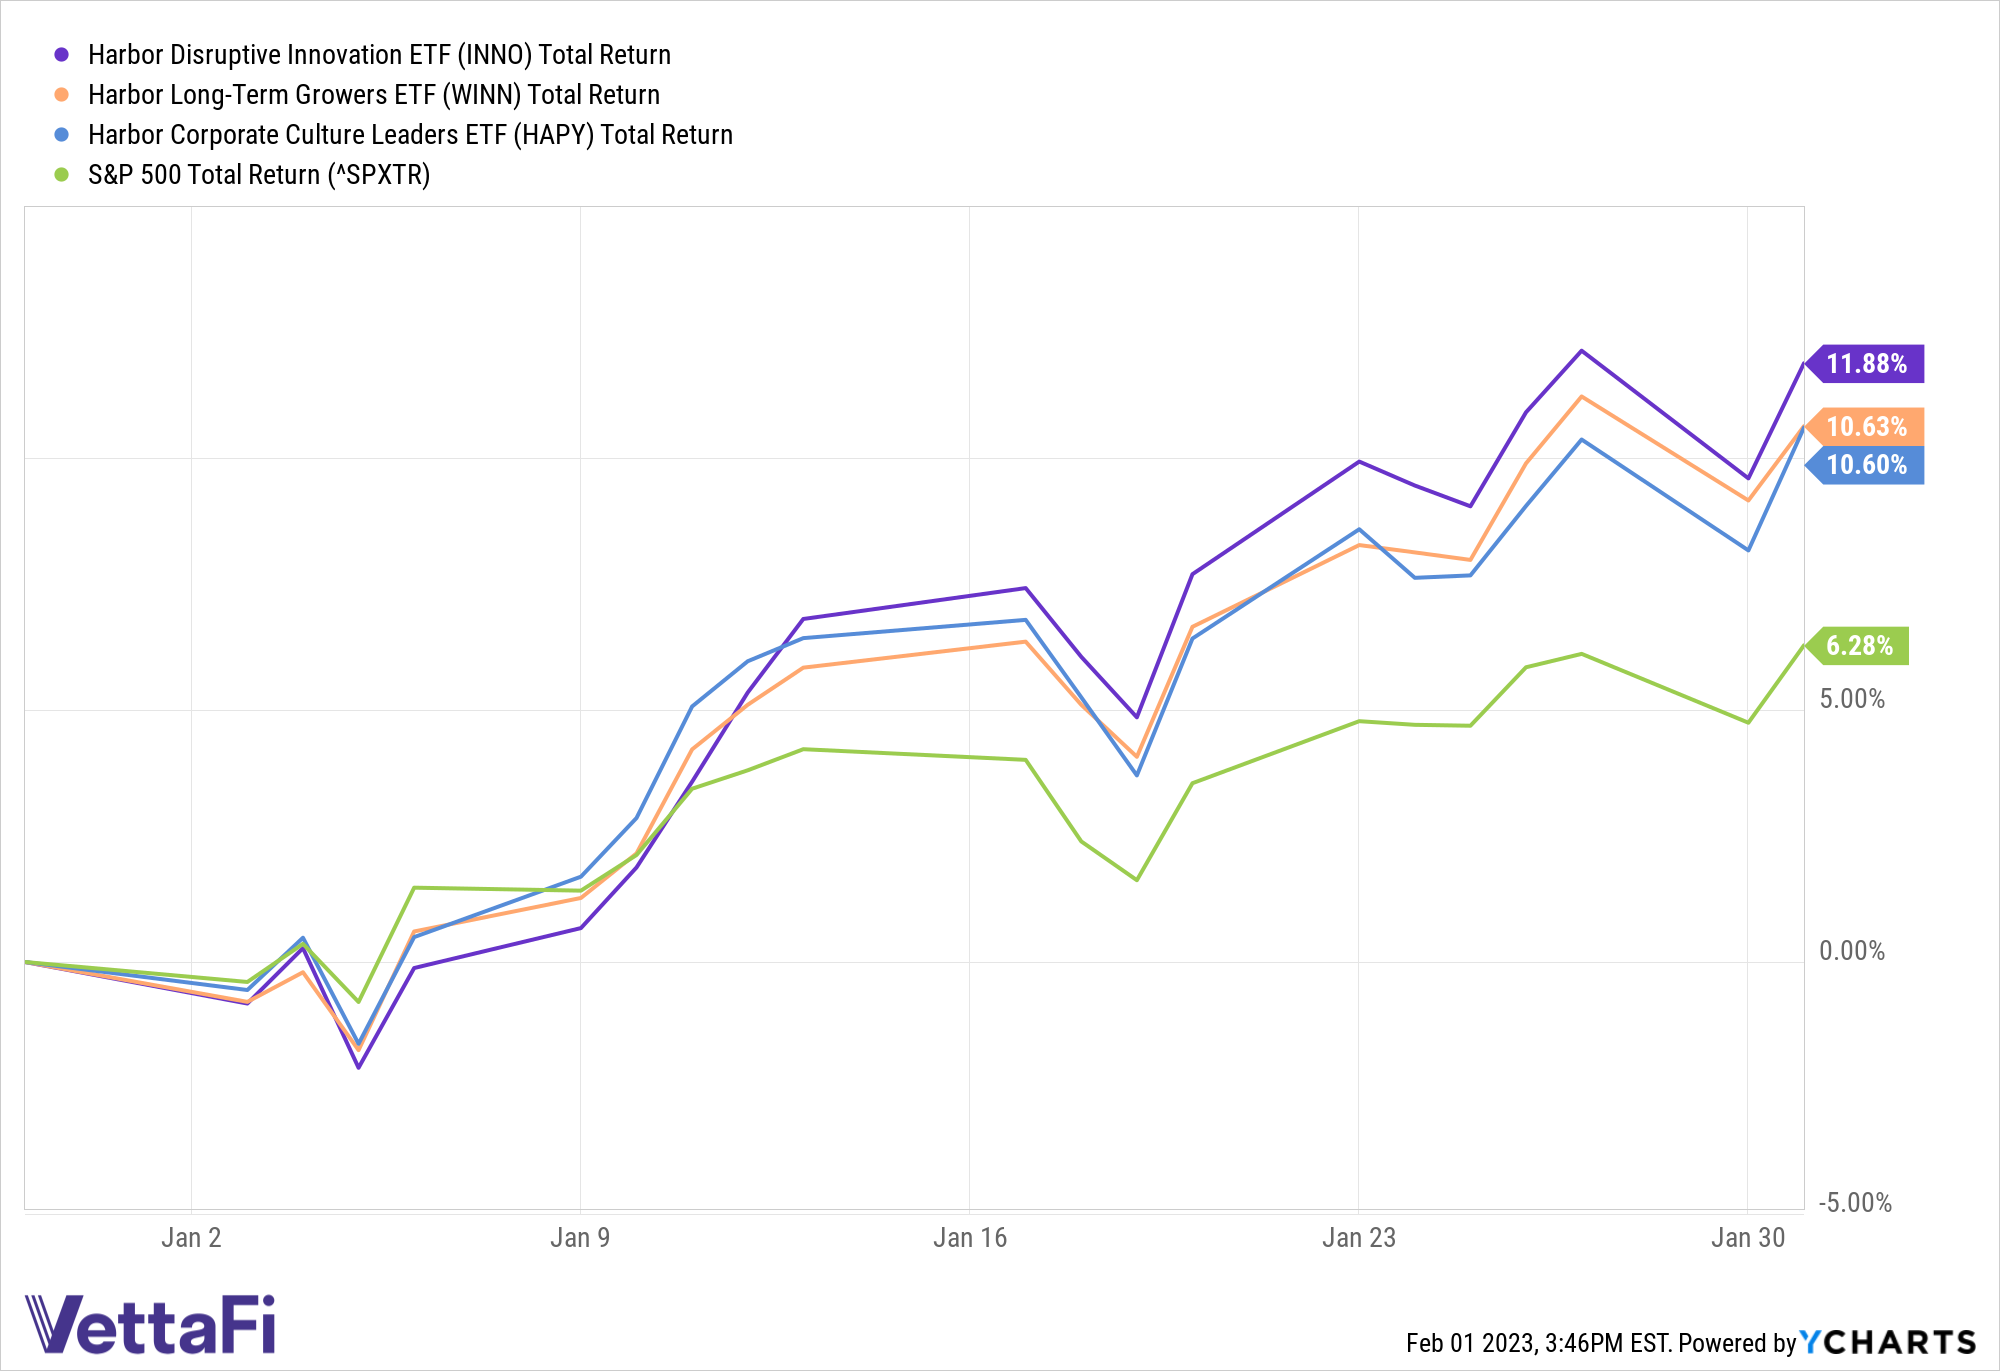 Performance of Harbor ETFs Compared to the S&P 500 in January